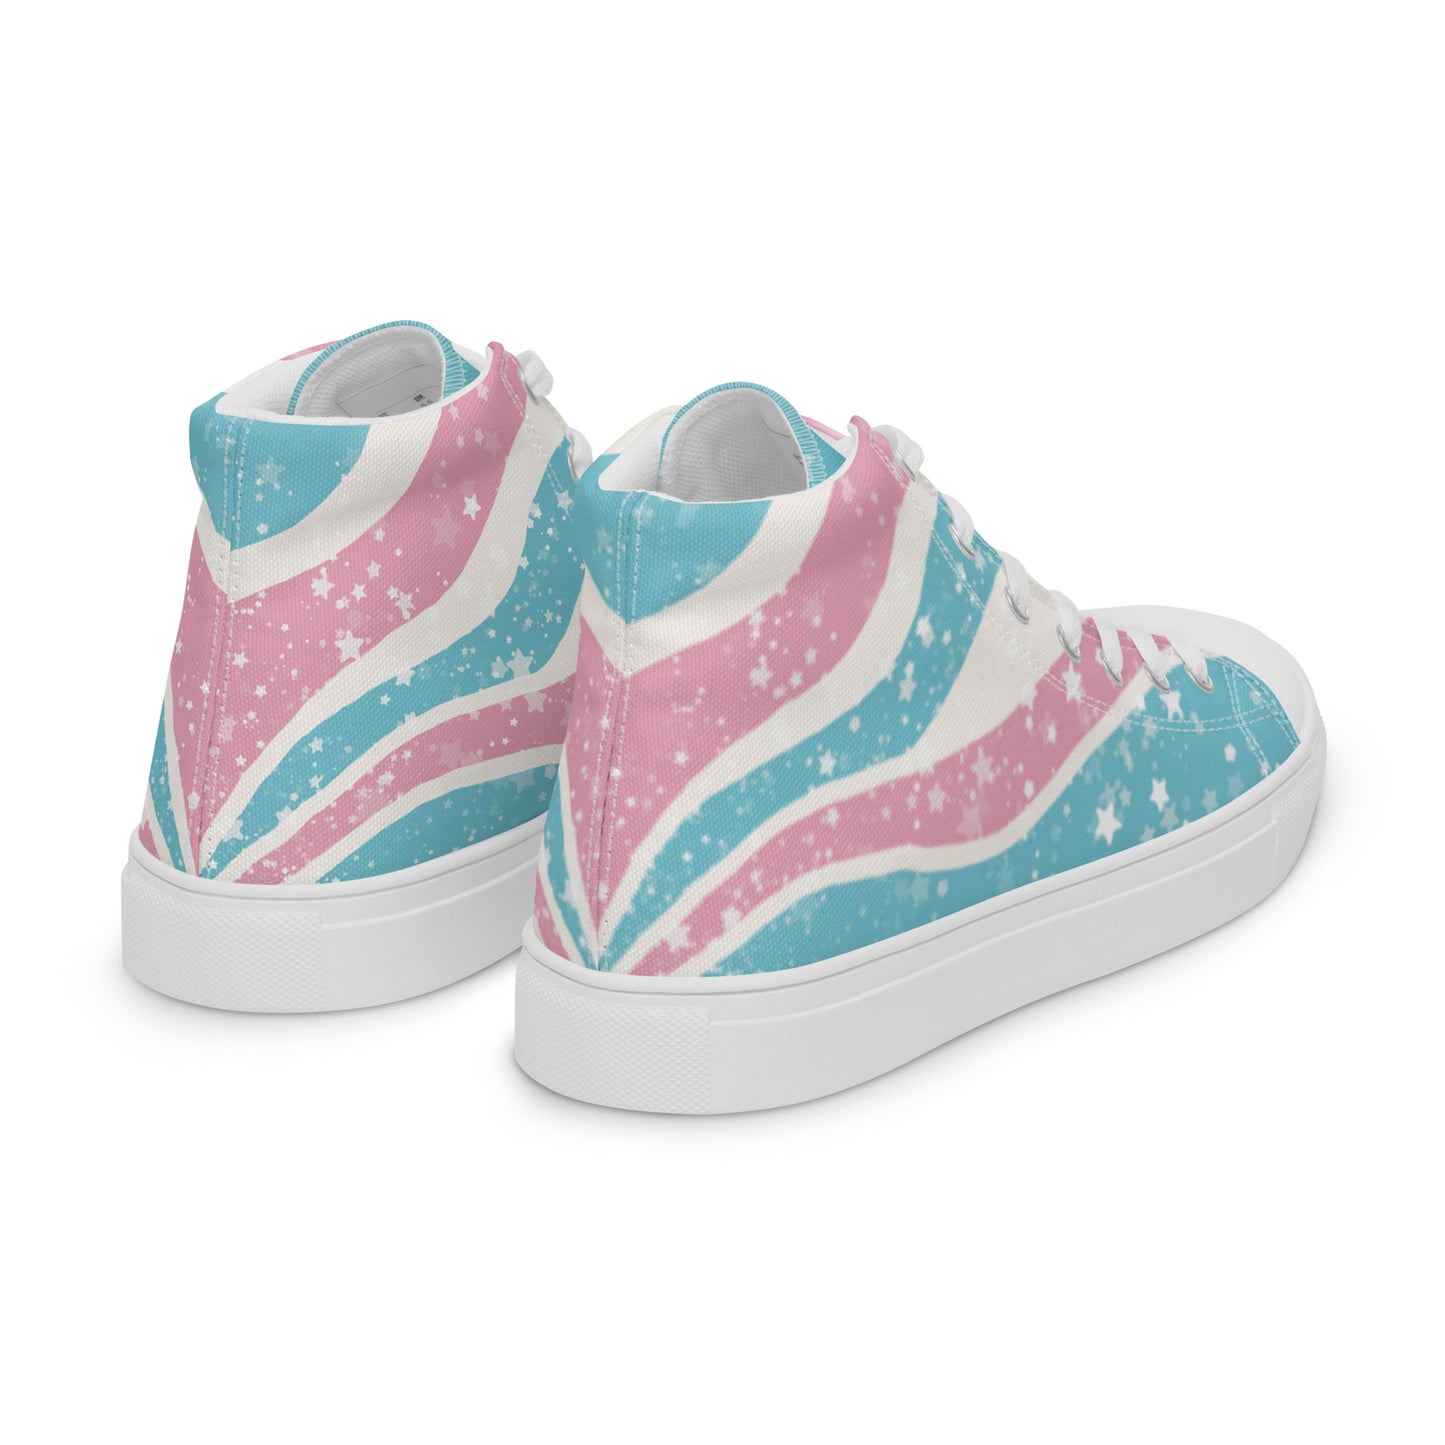 Right back view: A pair of high top shoes have way lines starting from the heel and getting larger towards the laces in pink, white, and blue with white stars all over, white laces, and white details.